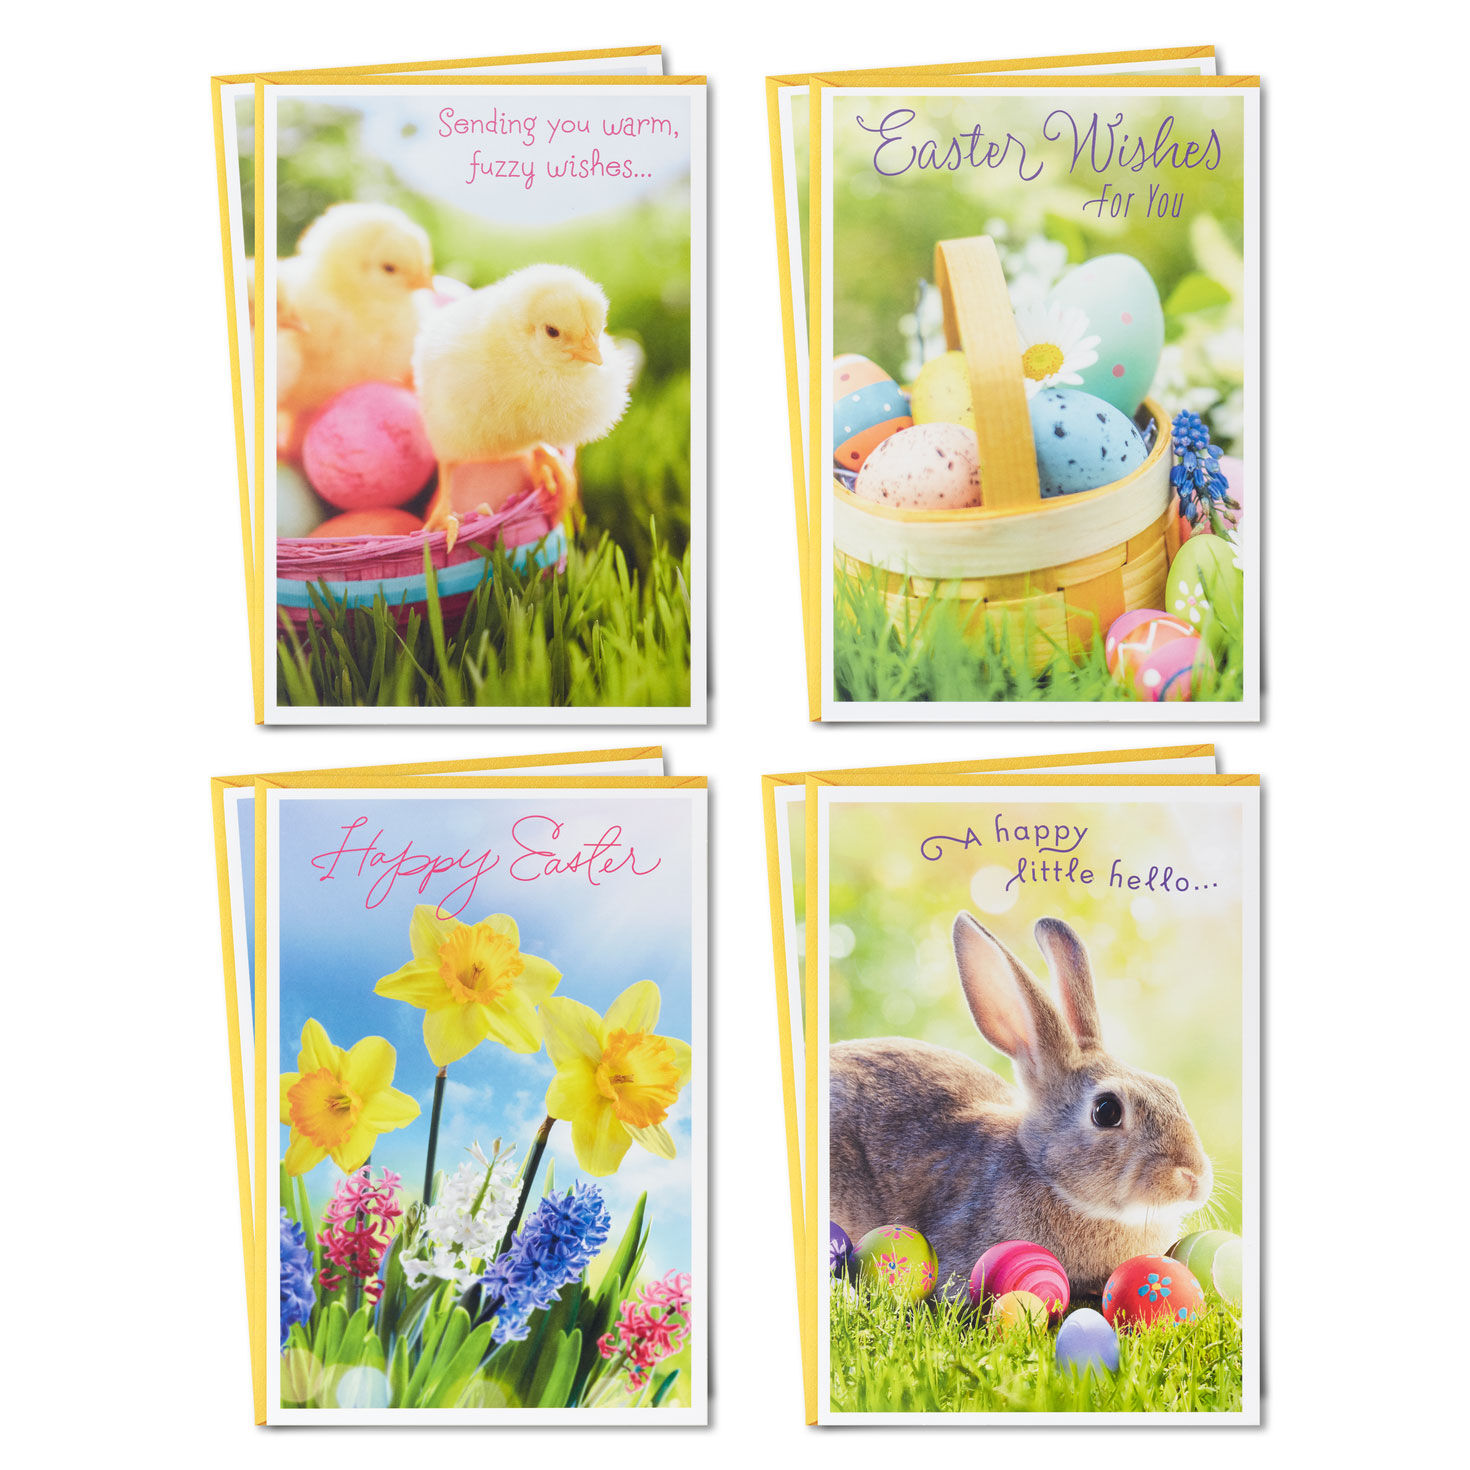 Pack of 12 Assorted Religious Design Easter Cards & Envelopes. 